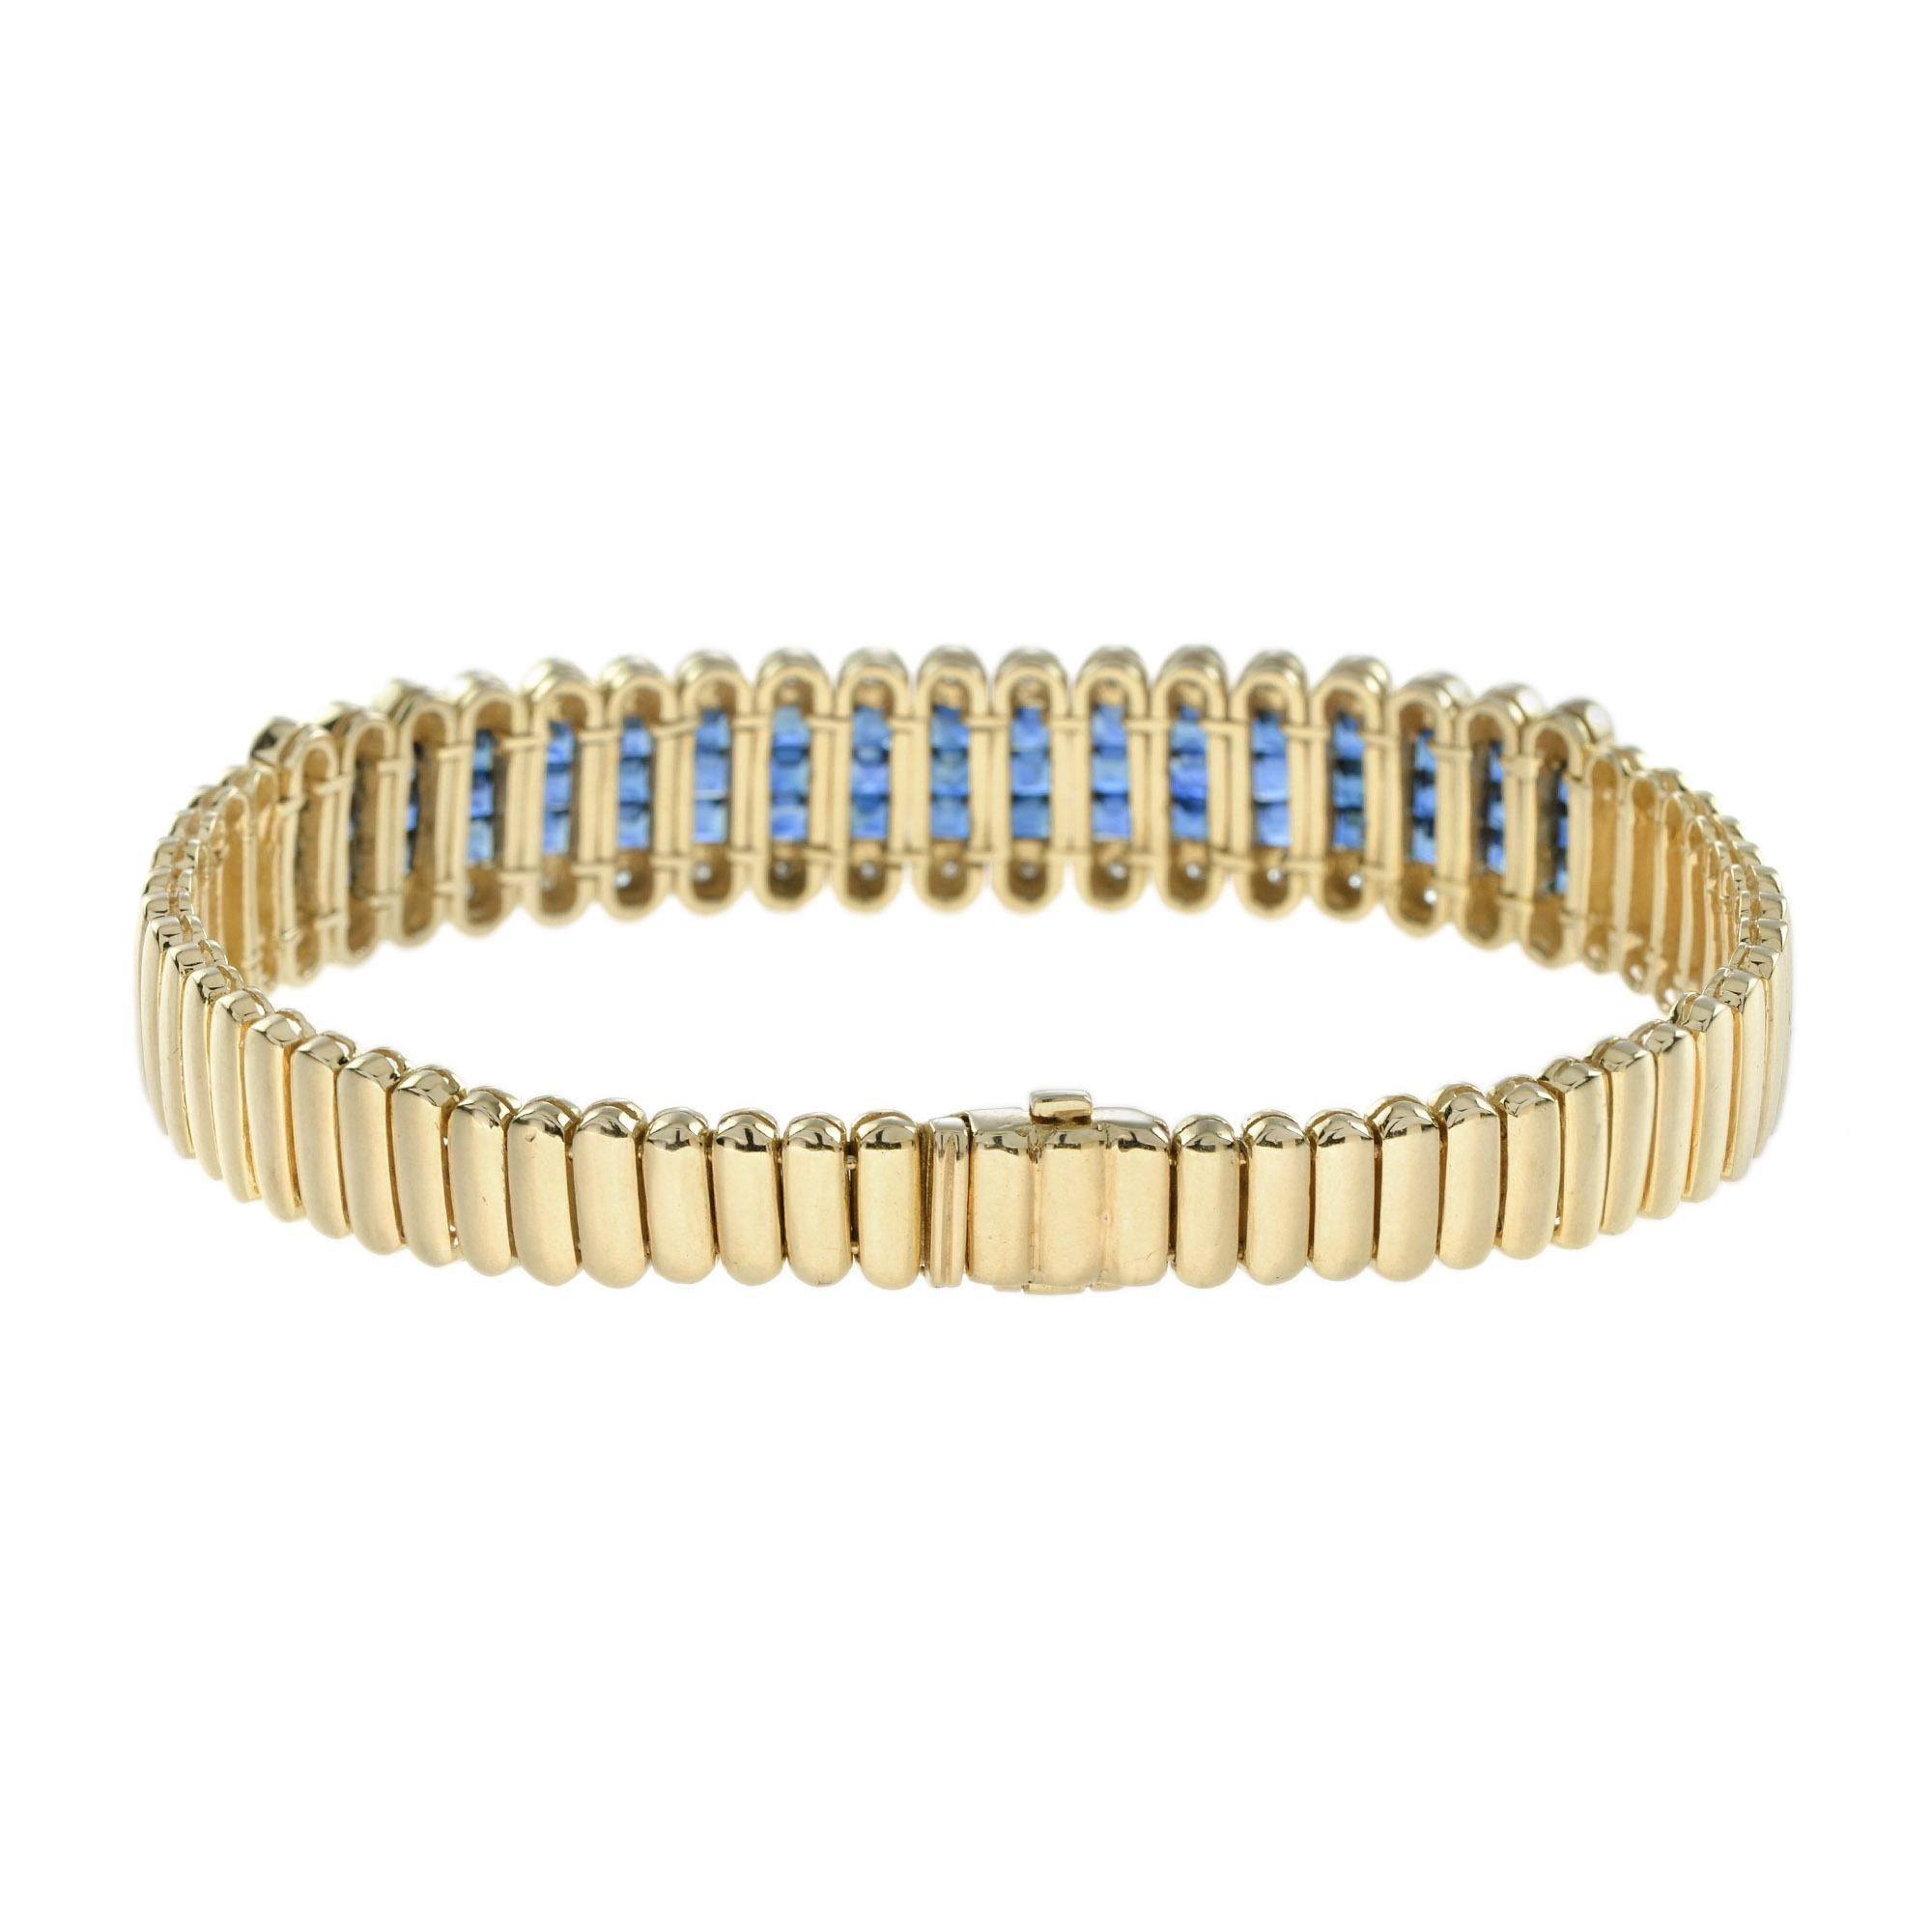 Art Deco French Cut Sapphire and Diamond Bracelet in 18k Yellow Gold For Sale